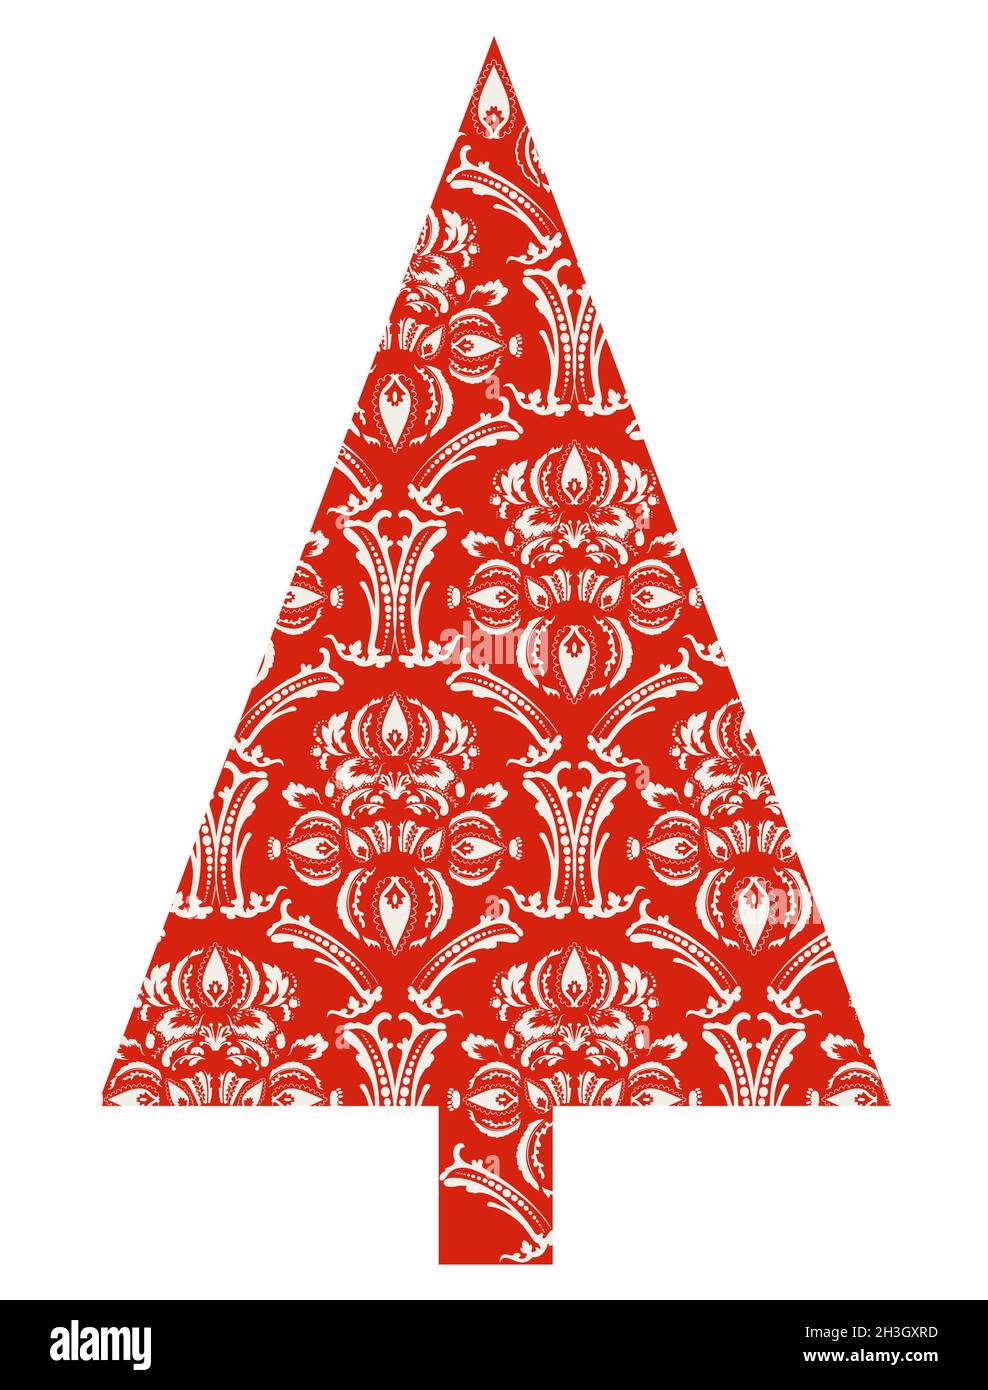 Christmas tree with red pattern Stock Photo